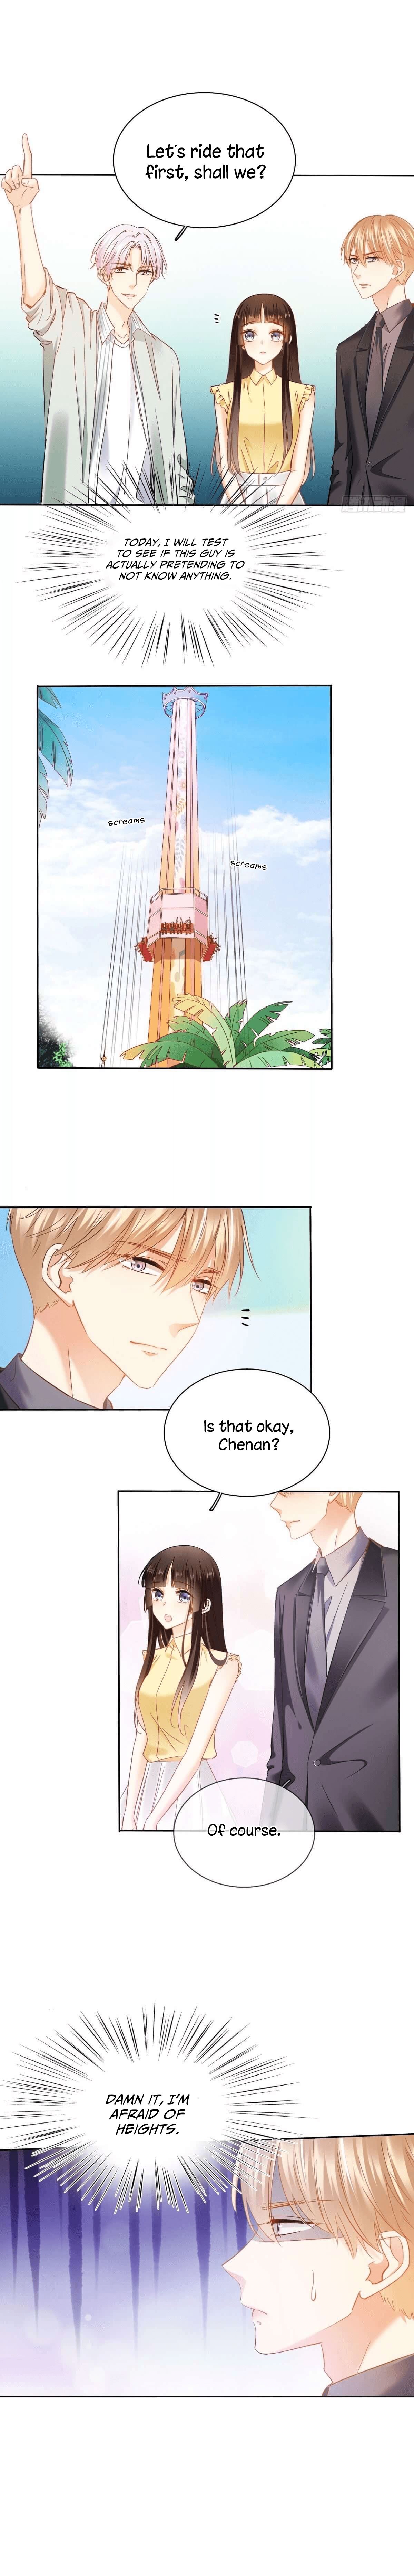 Flying Over a Thousand Mountains to Love You Ch. 52 I didn’t think you were this sort of man, Chenan Dan